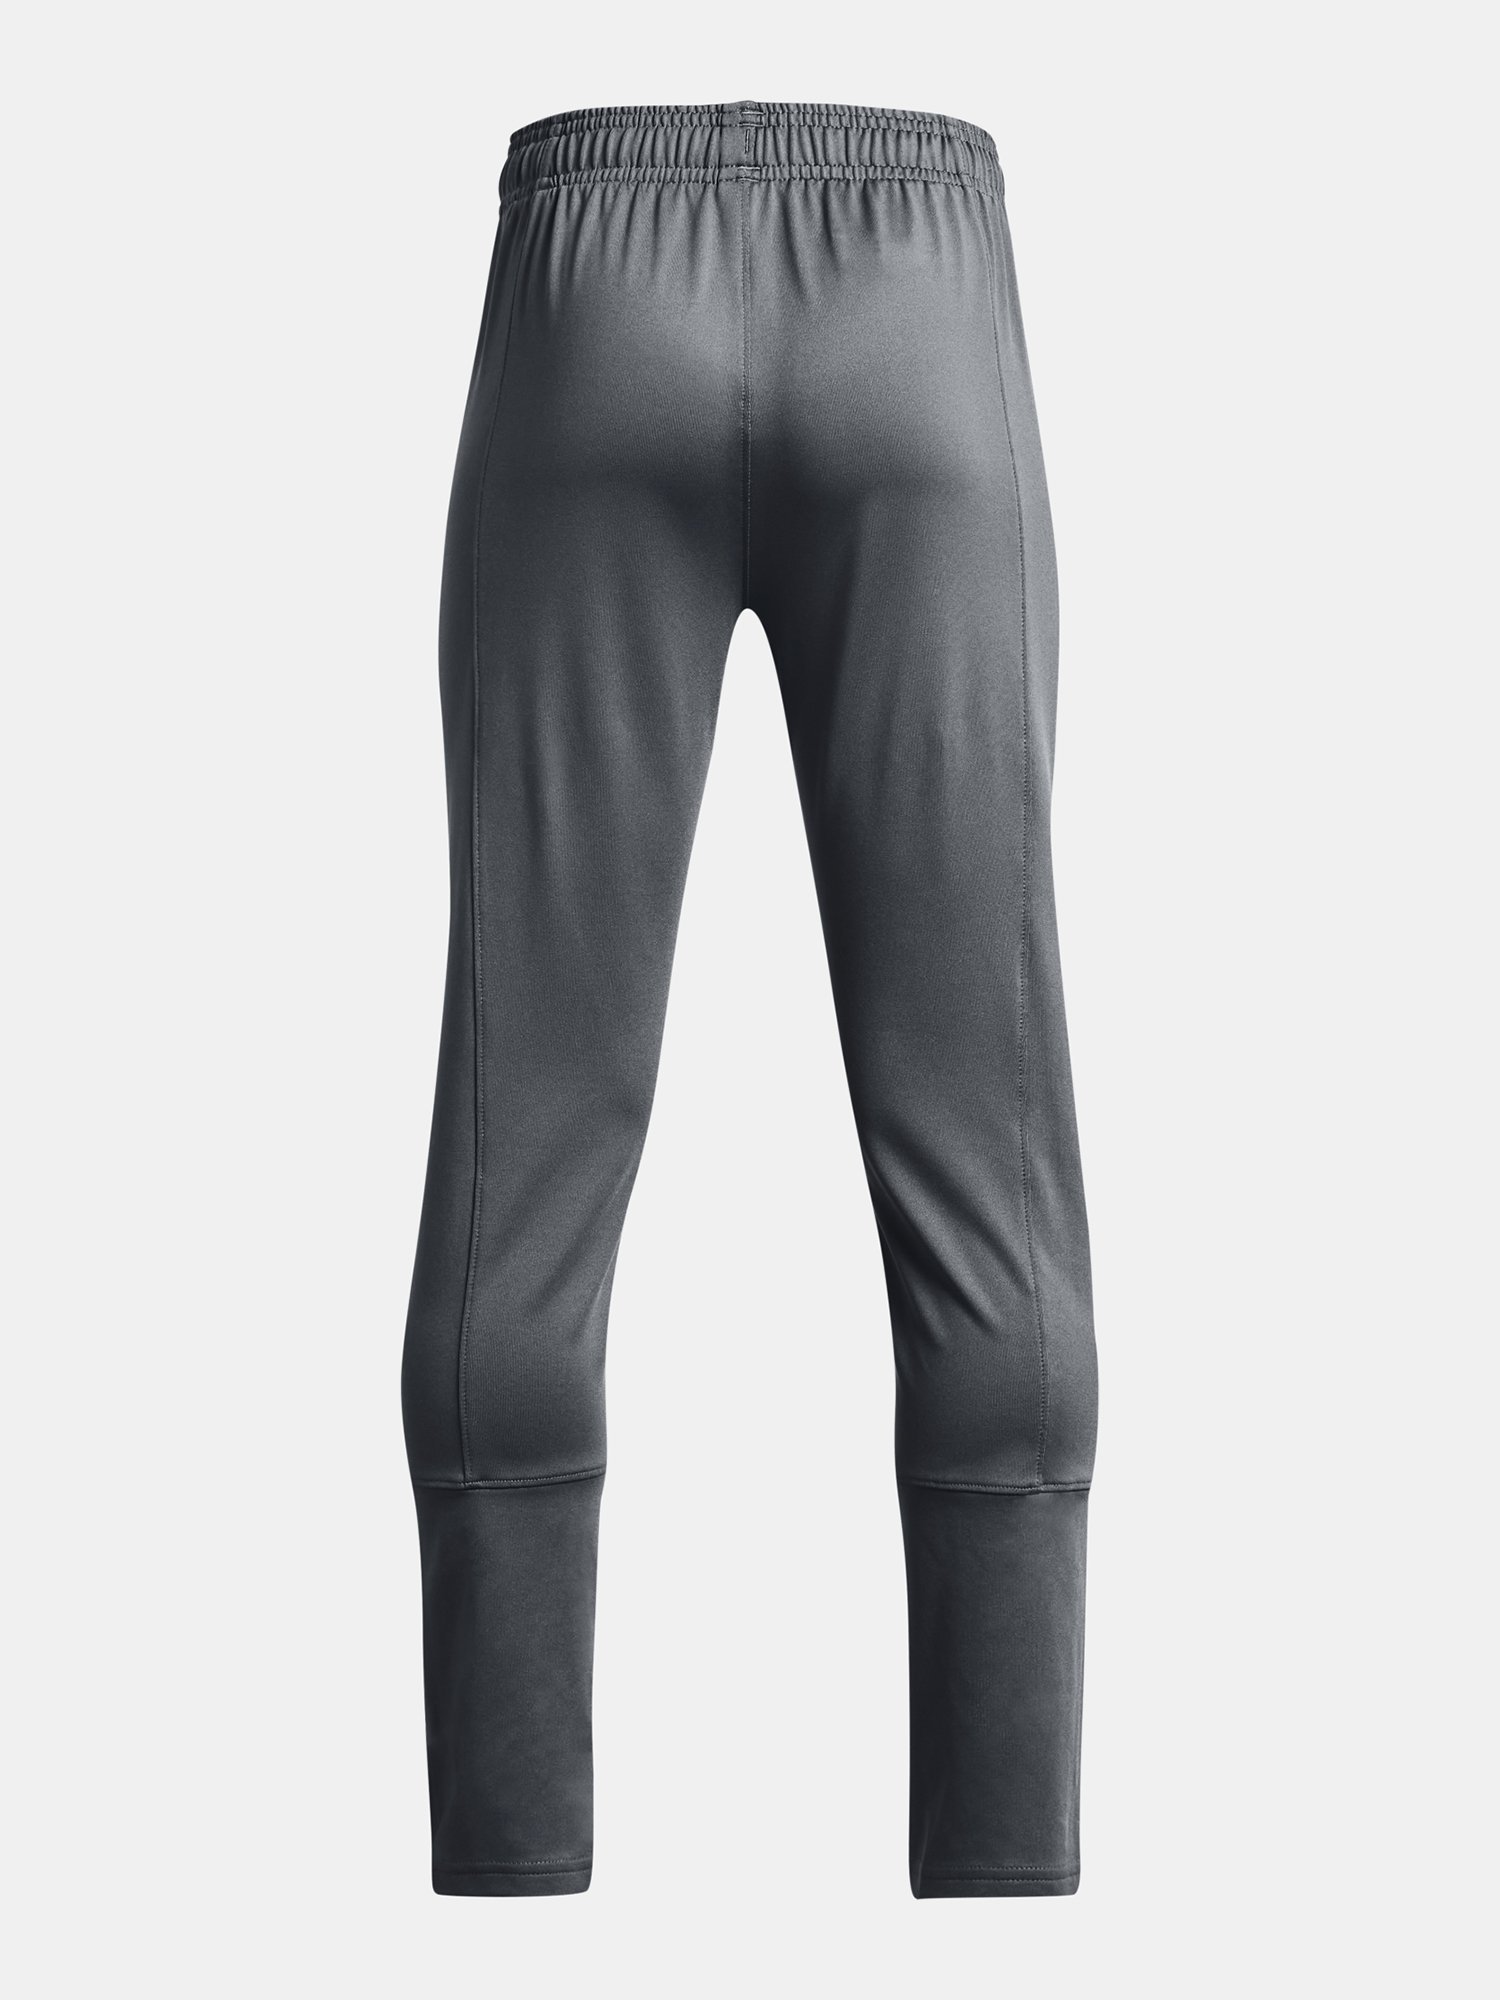 Tepláky Under Armour Y Challenger Training Pant - sivá